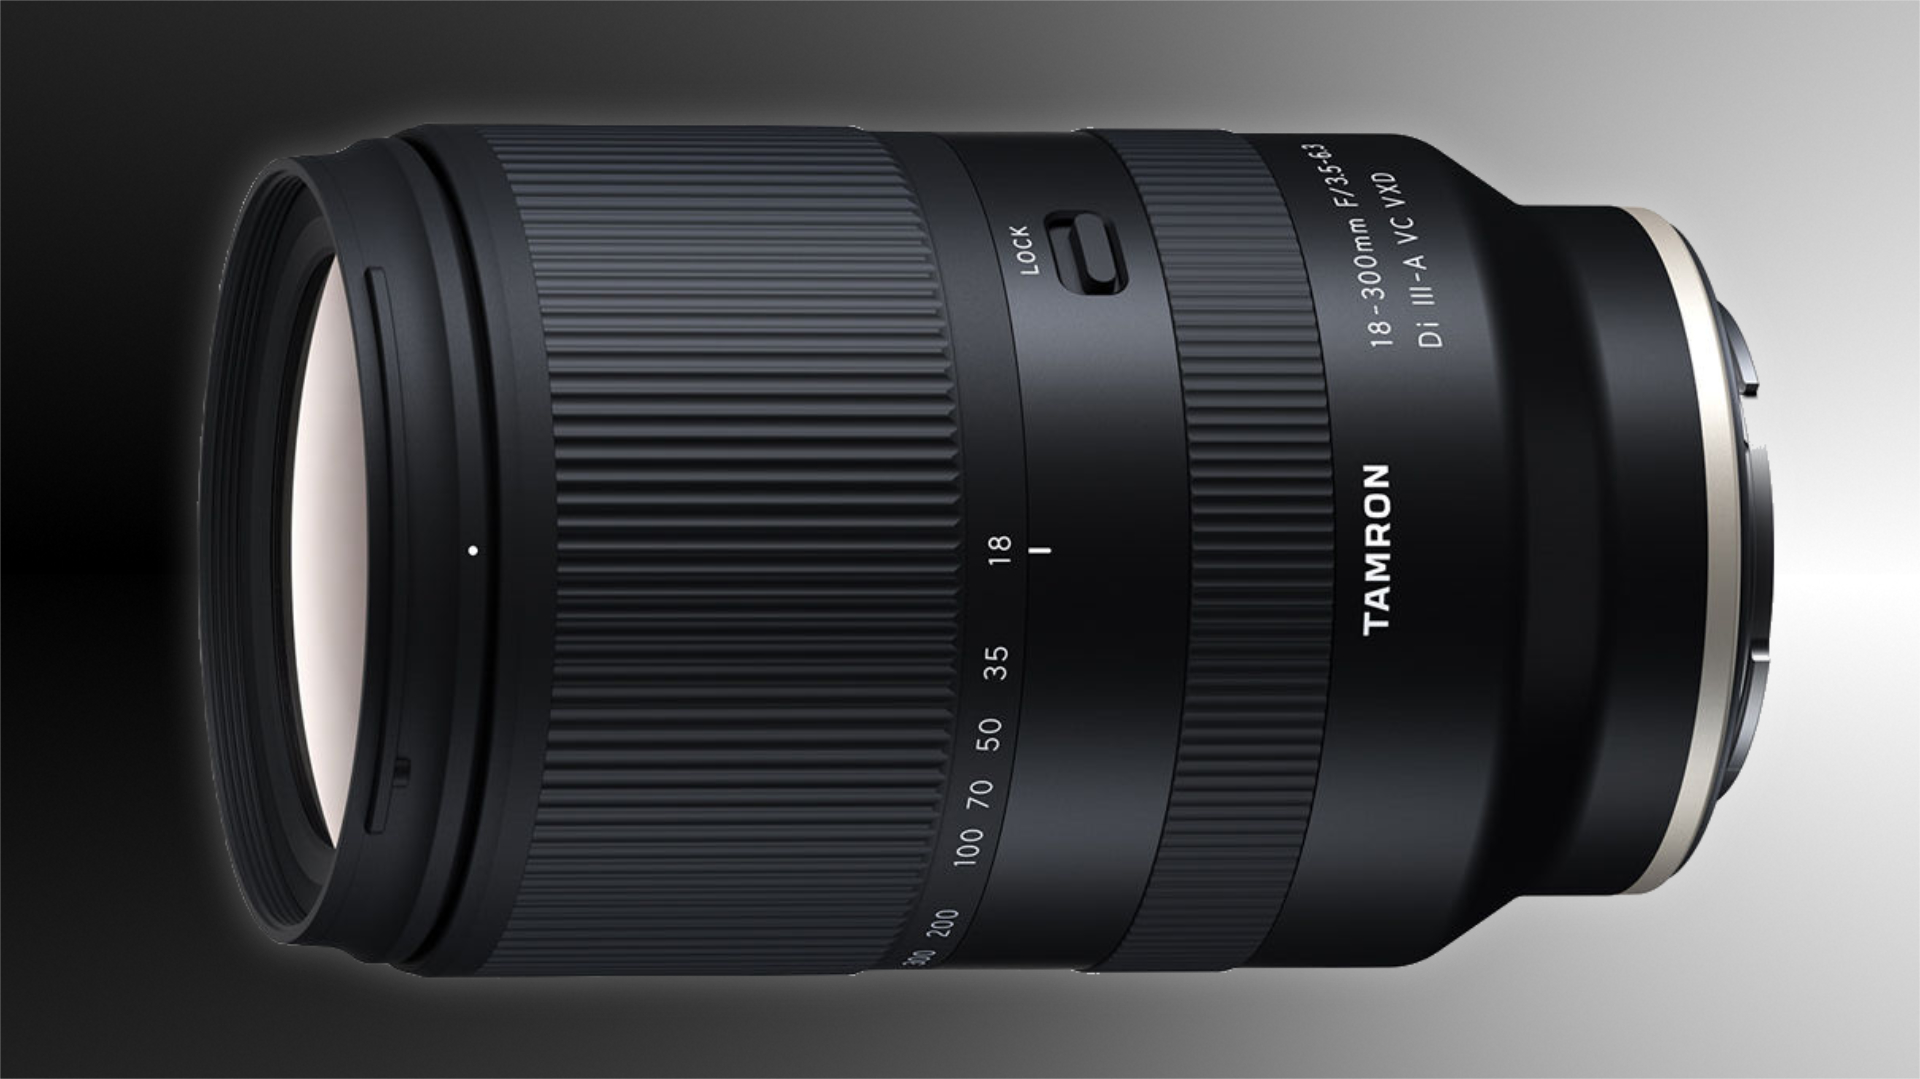 Tamron 18-300mm F3.5-6.3 Zoom for FUJIFILM and Sony Cameras